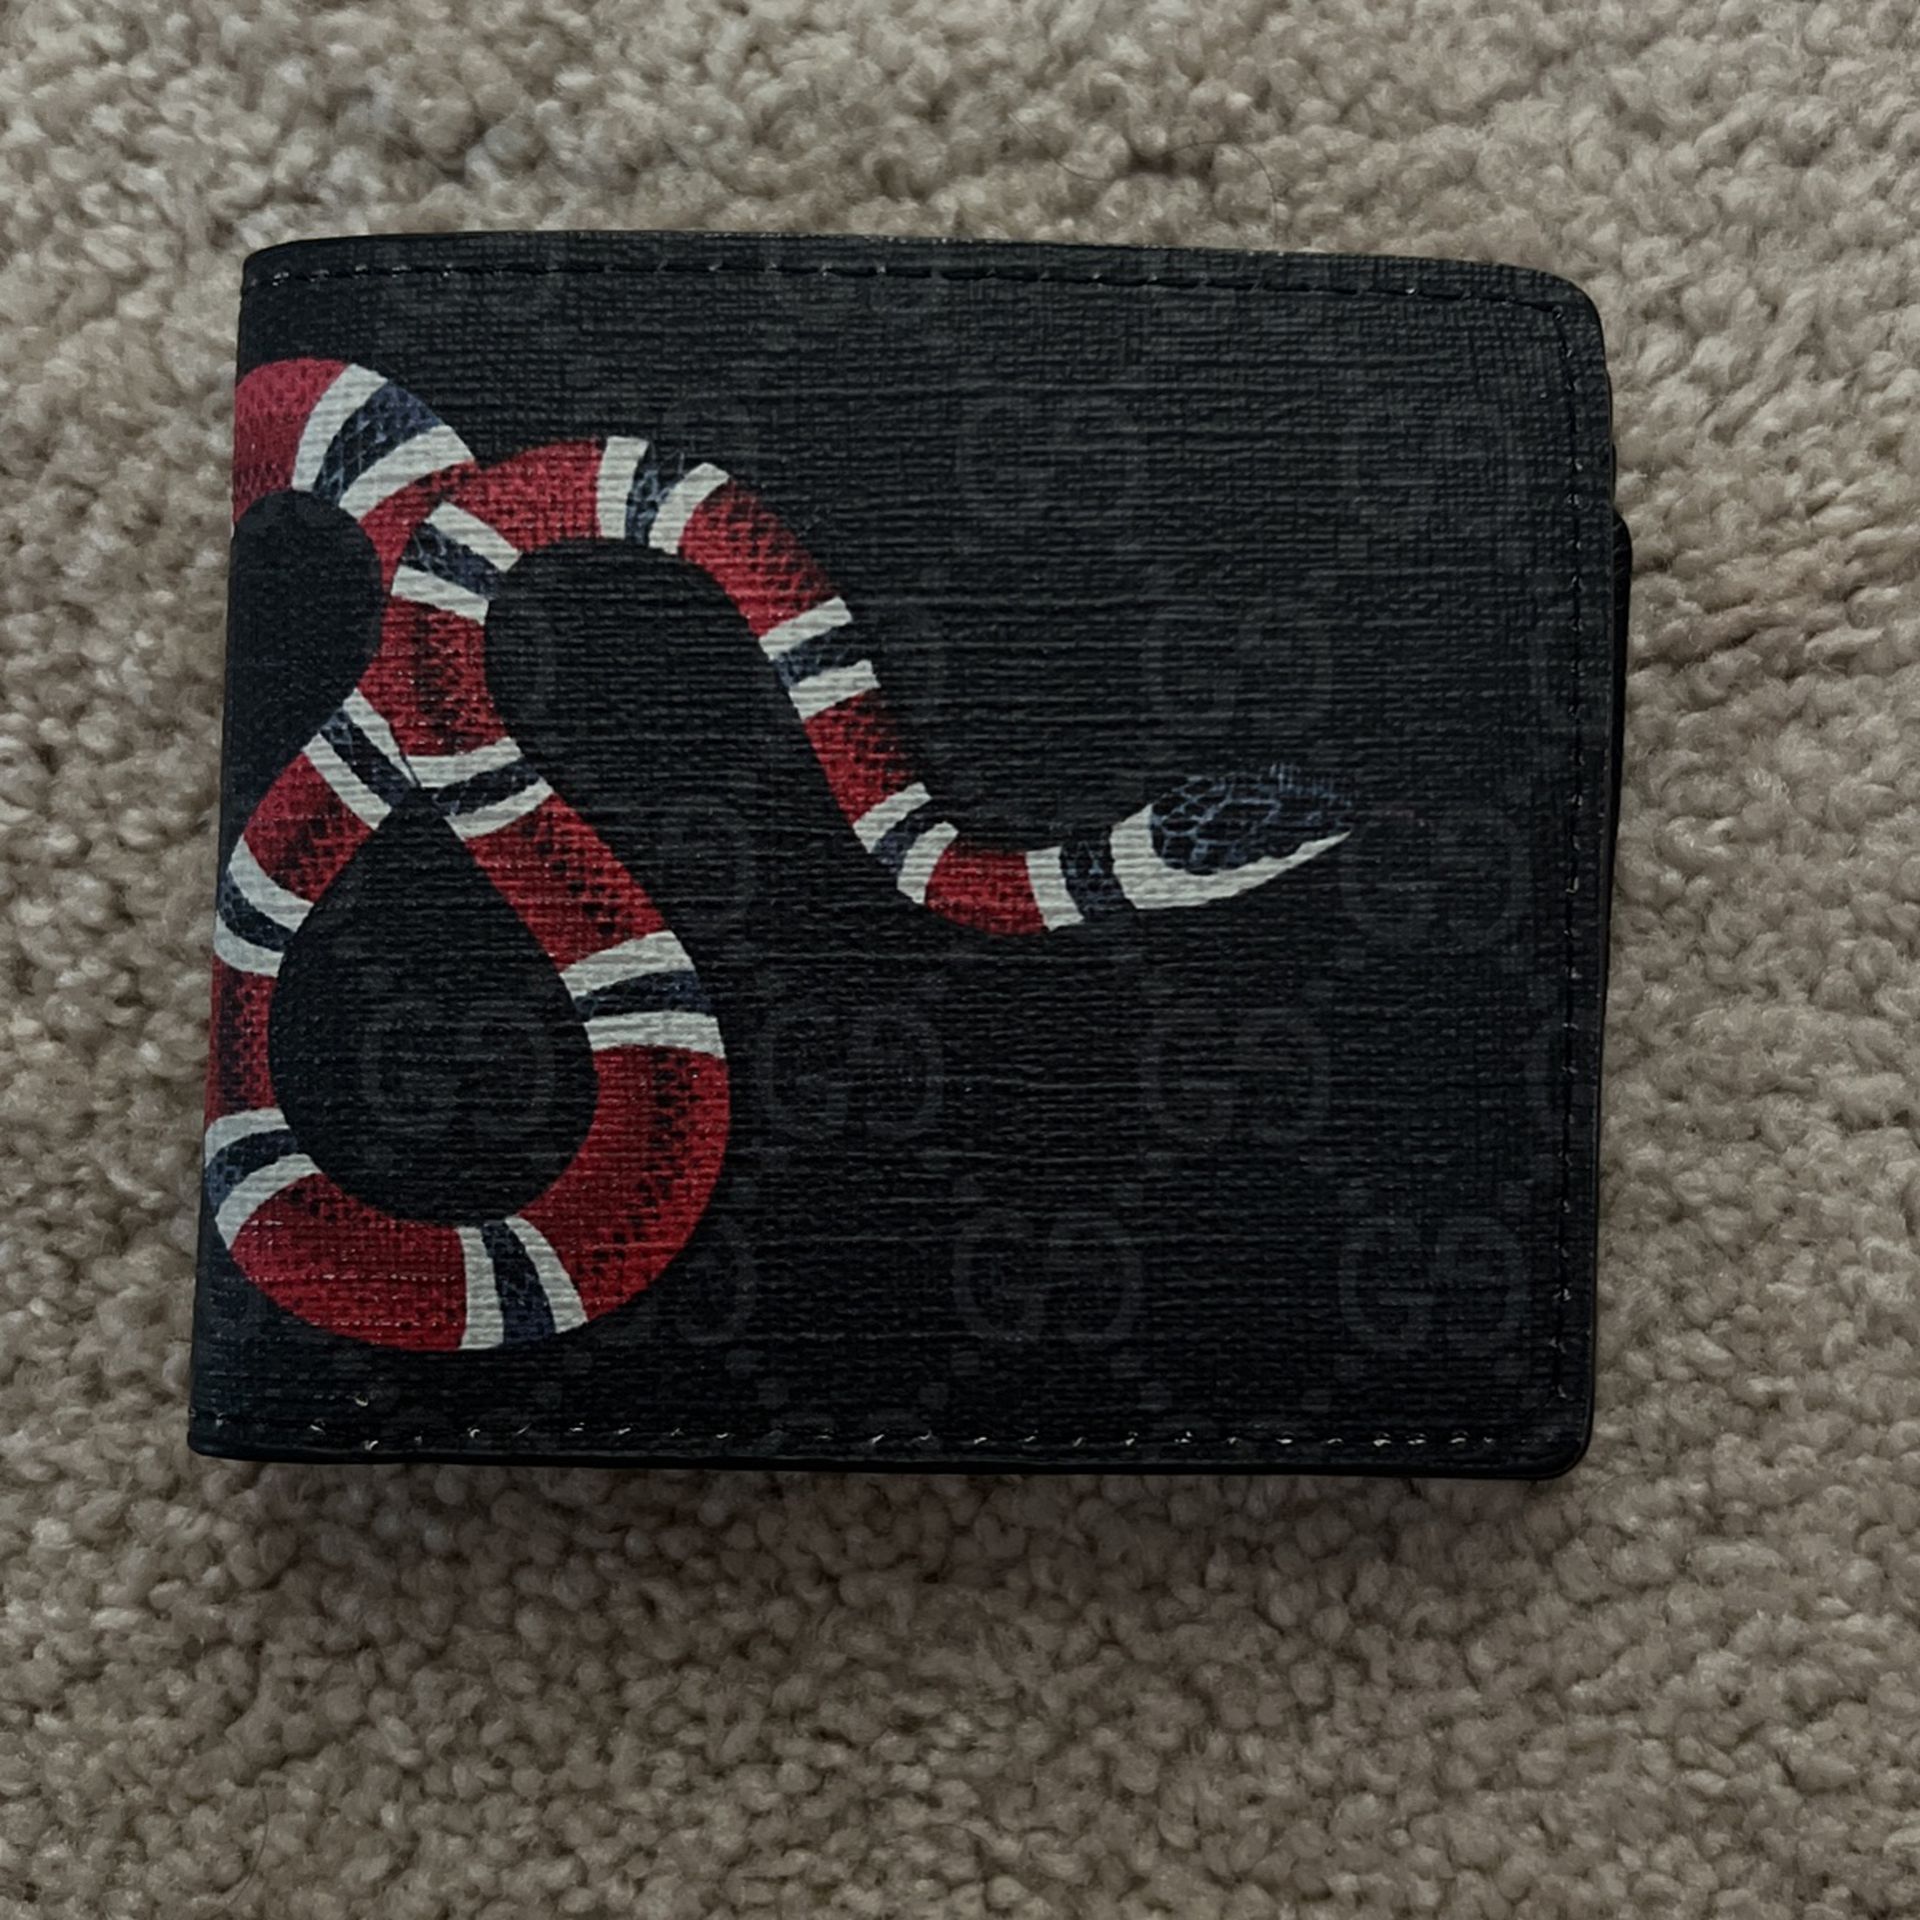 Brand New Authentic Gucci Wallet